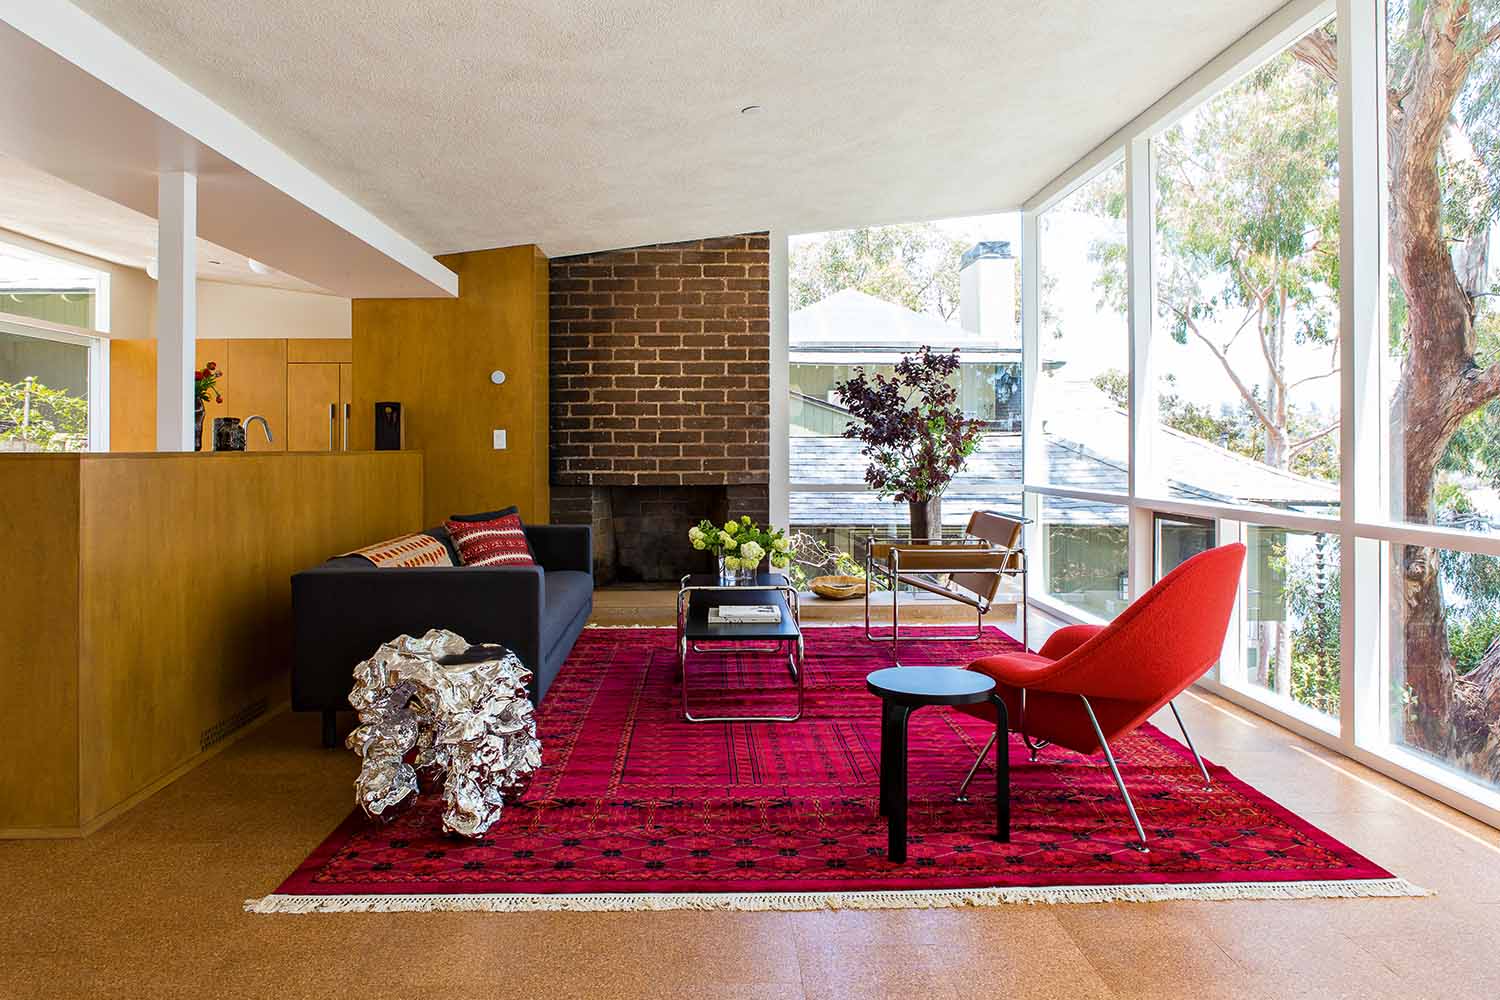 Conserving Modernism in L.A.